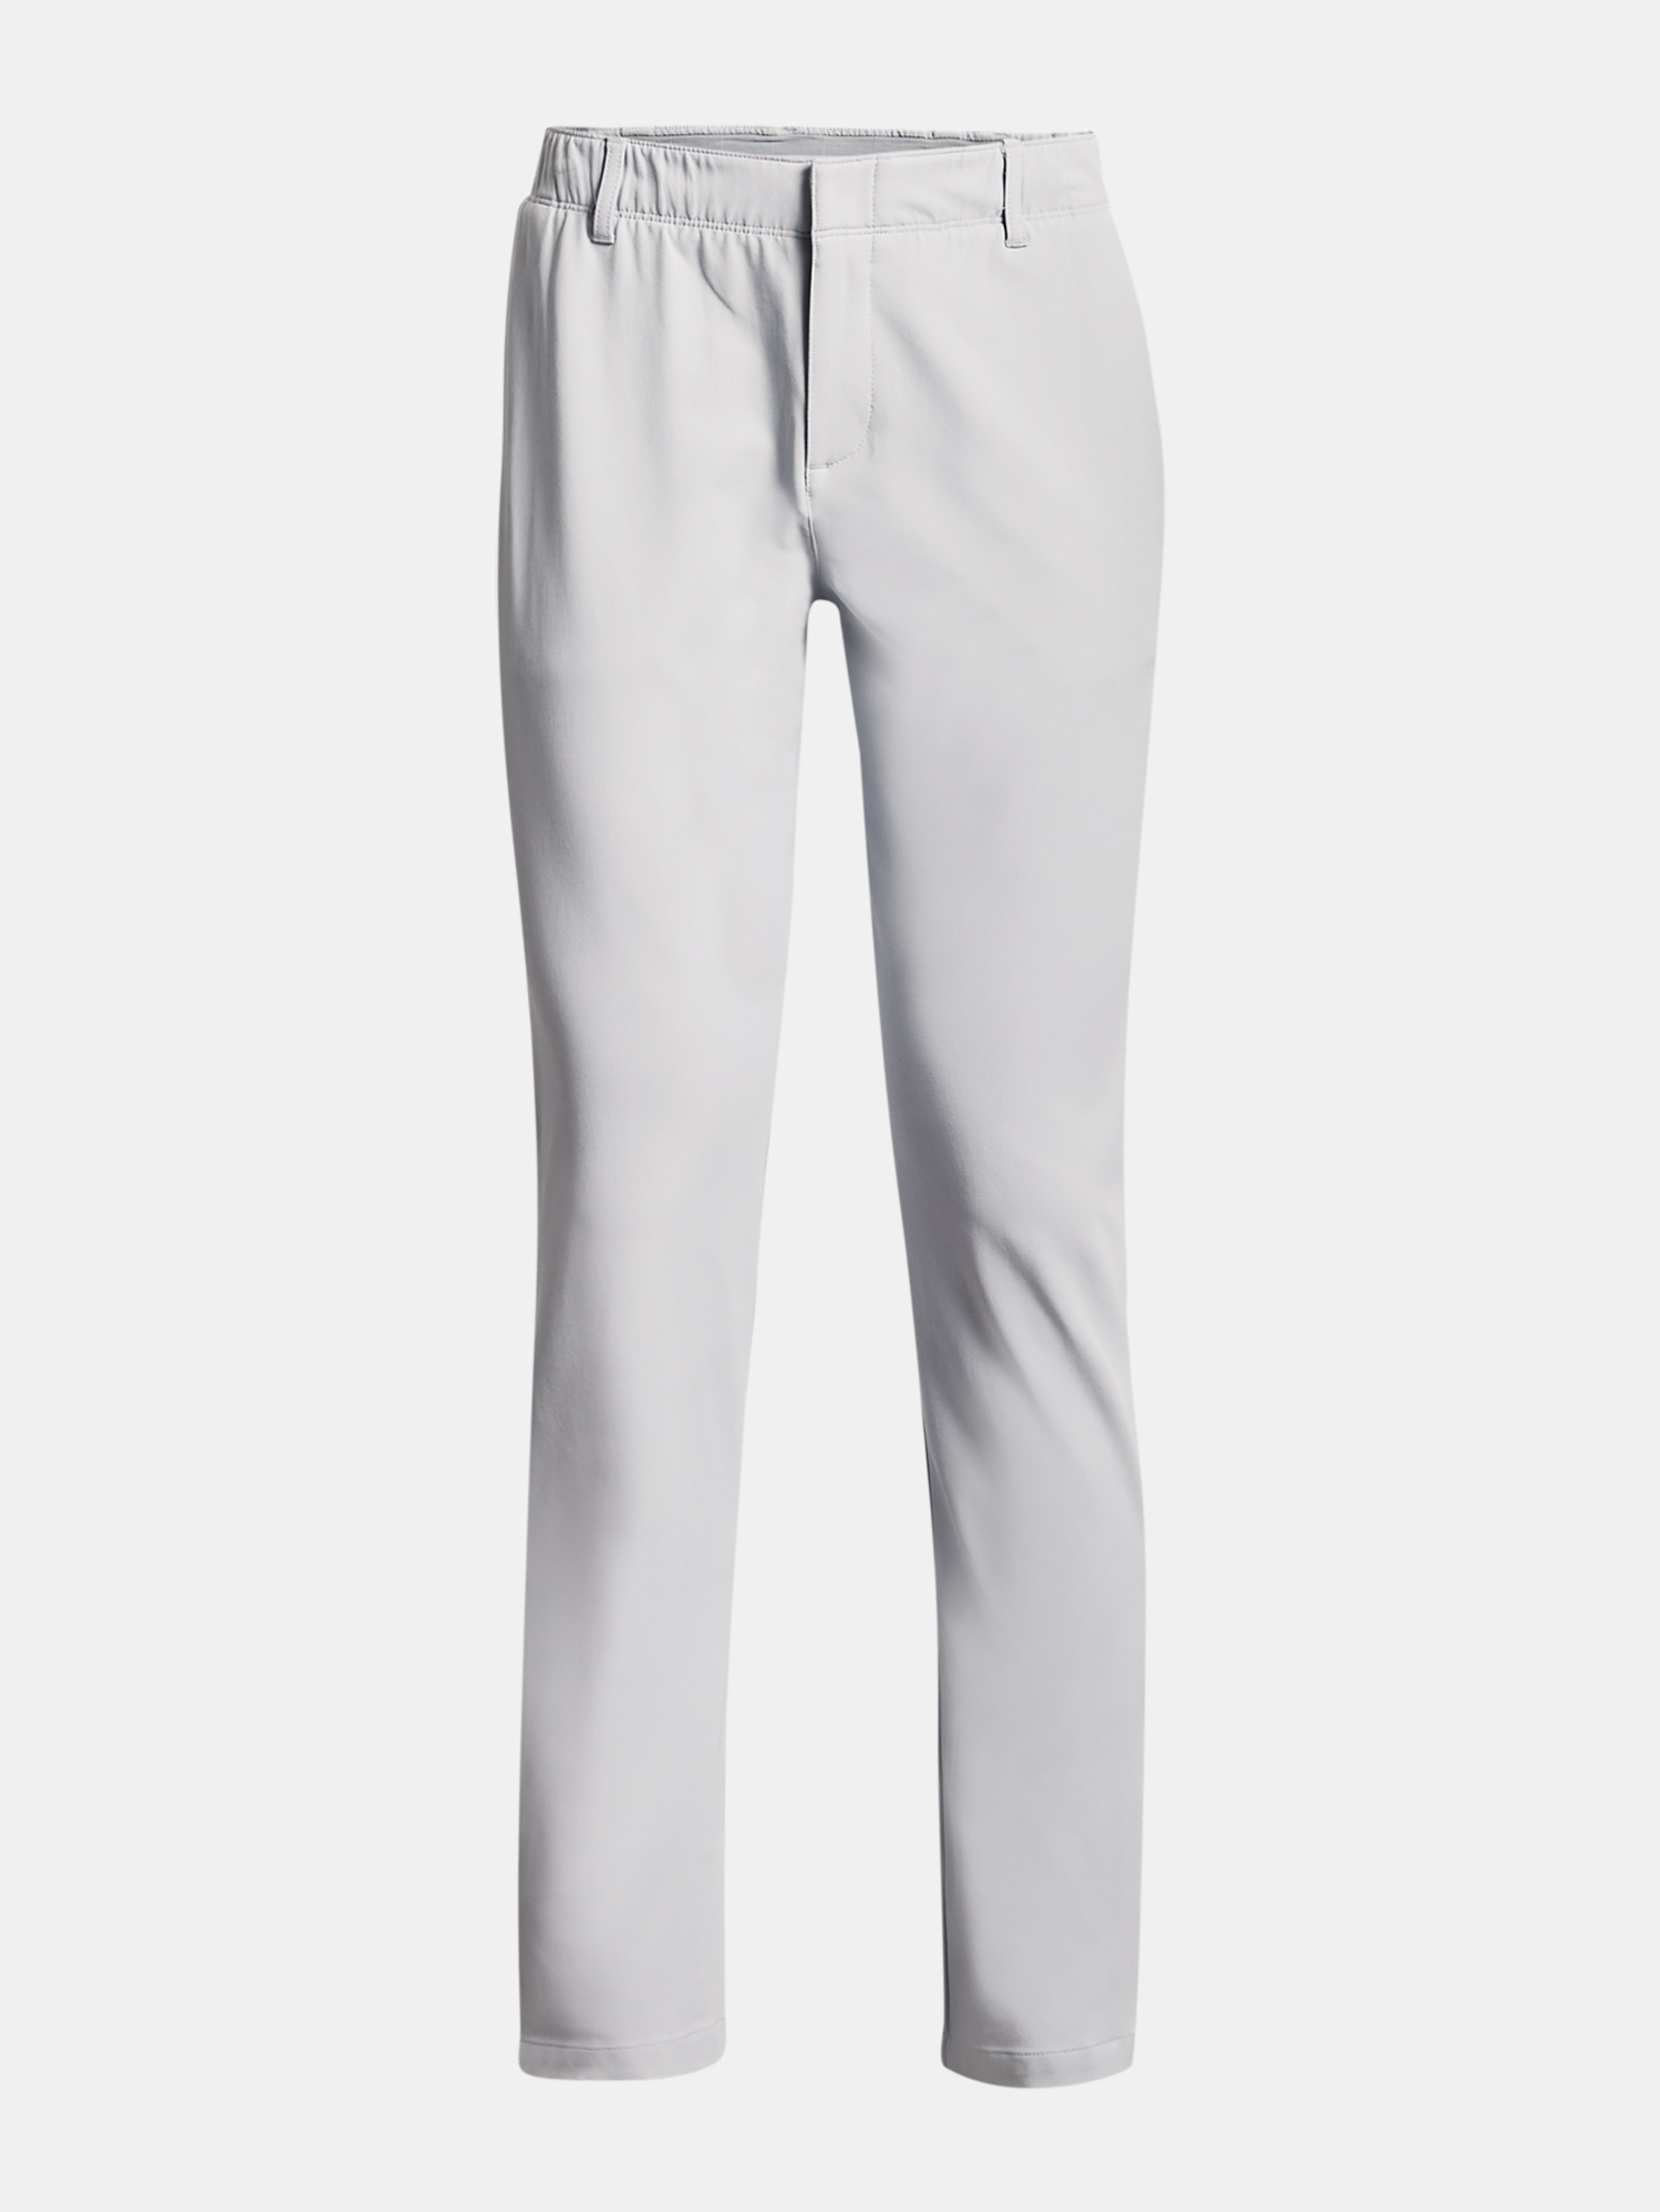 Nohavice Under Armour Links Pant-GRY